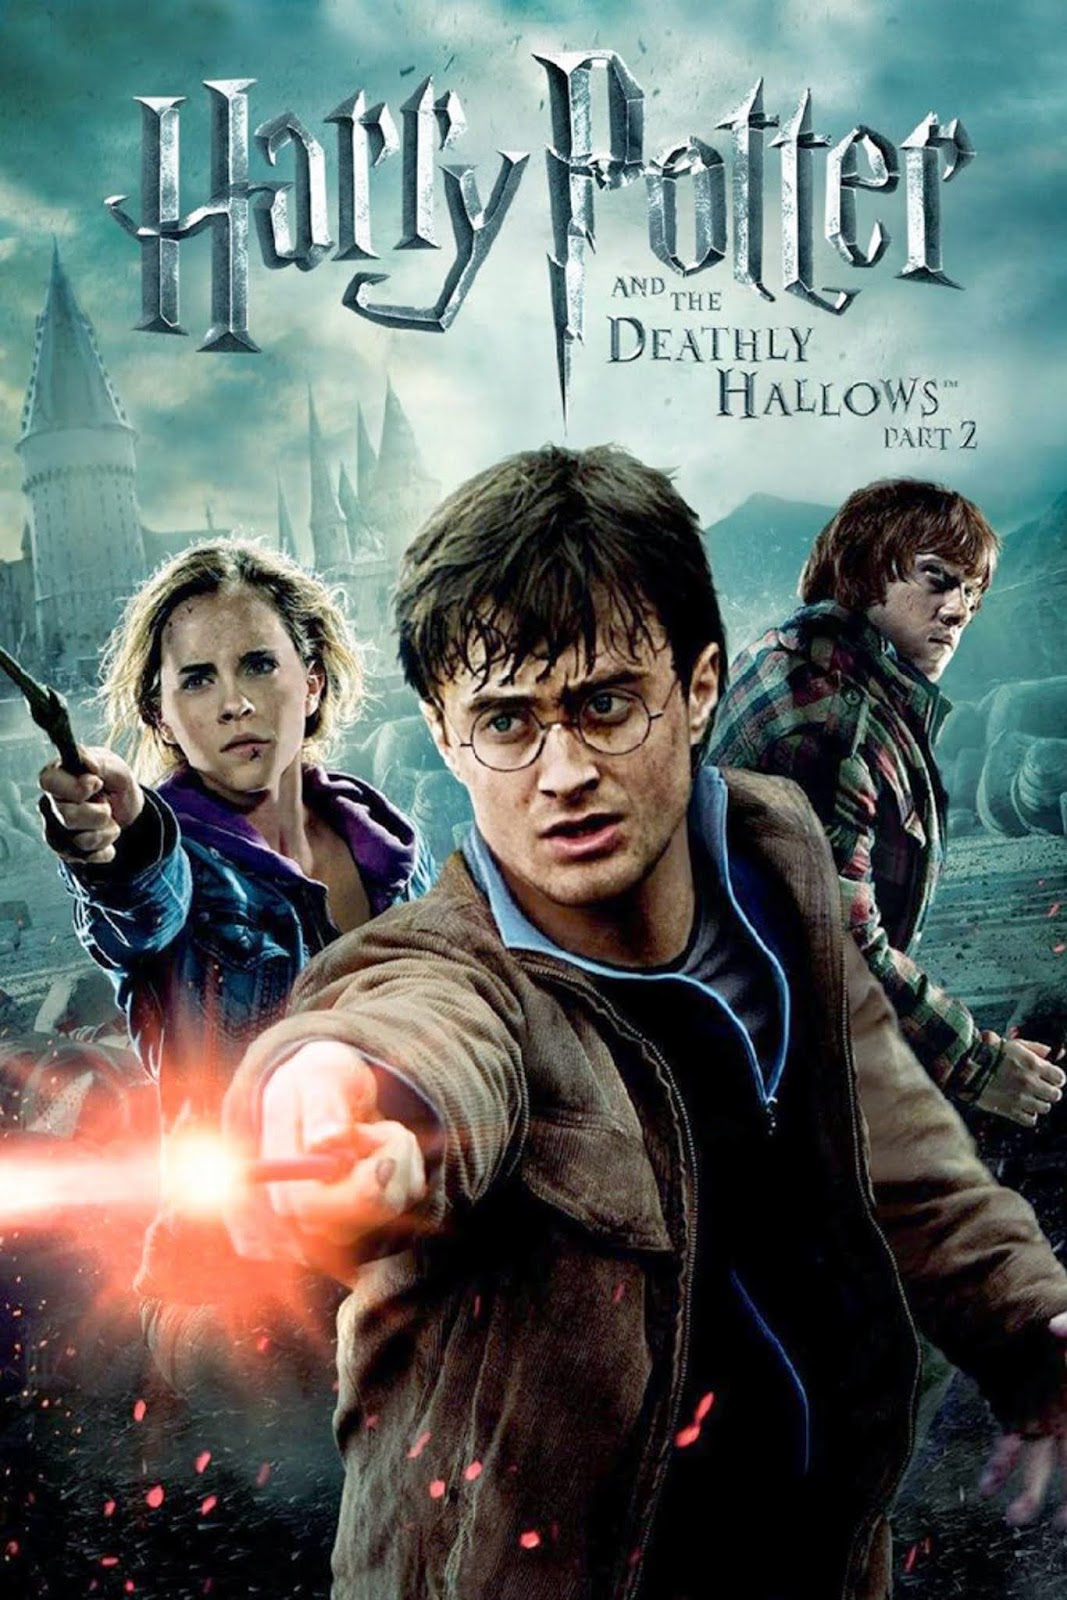 Harry potter full movie free download in medium quality